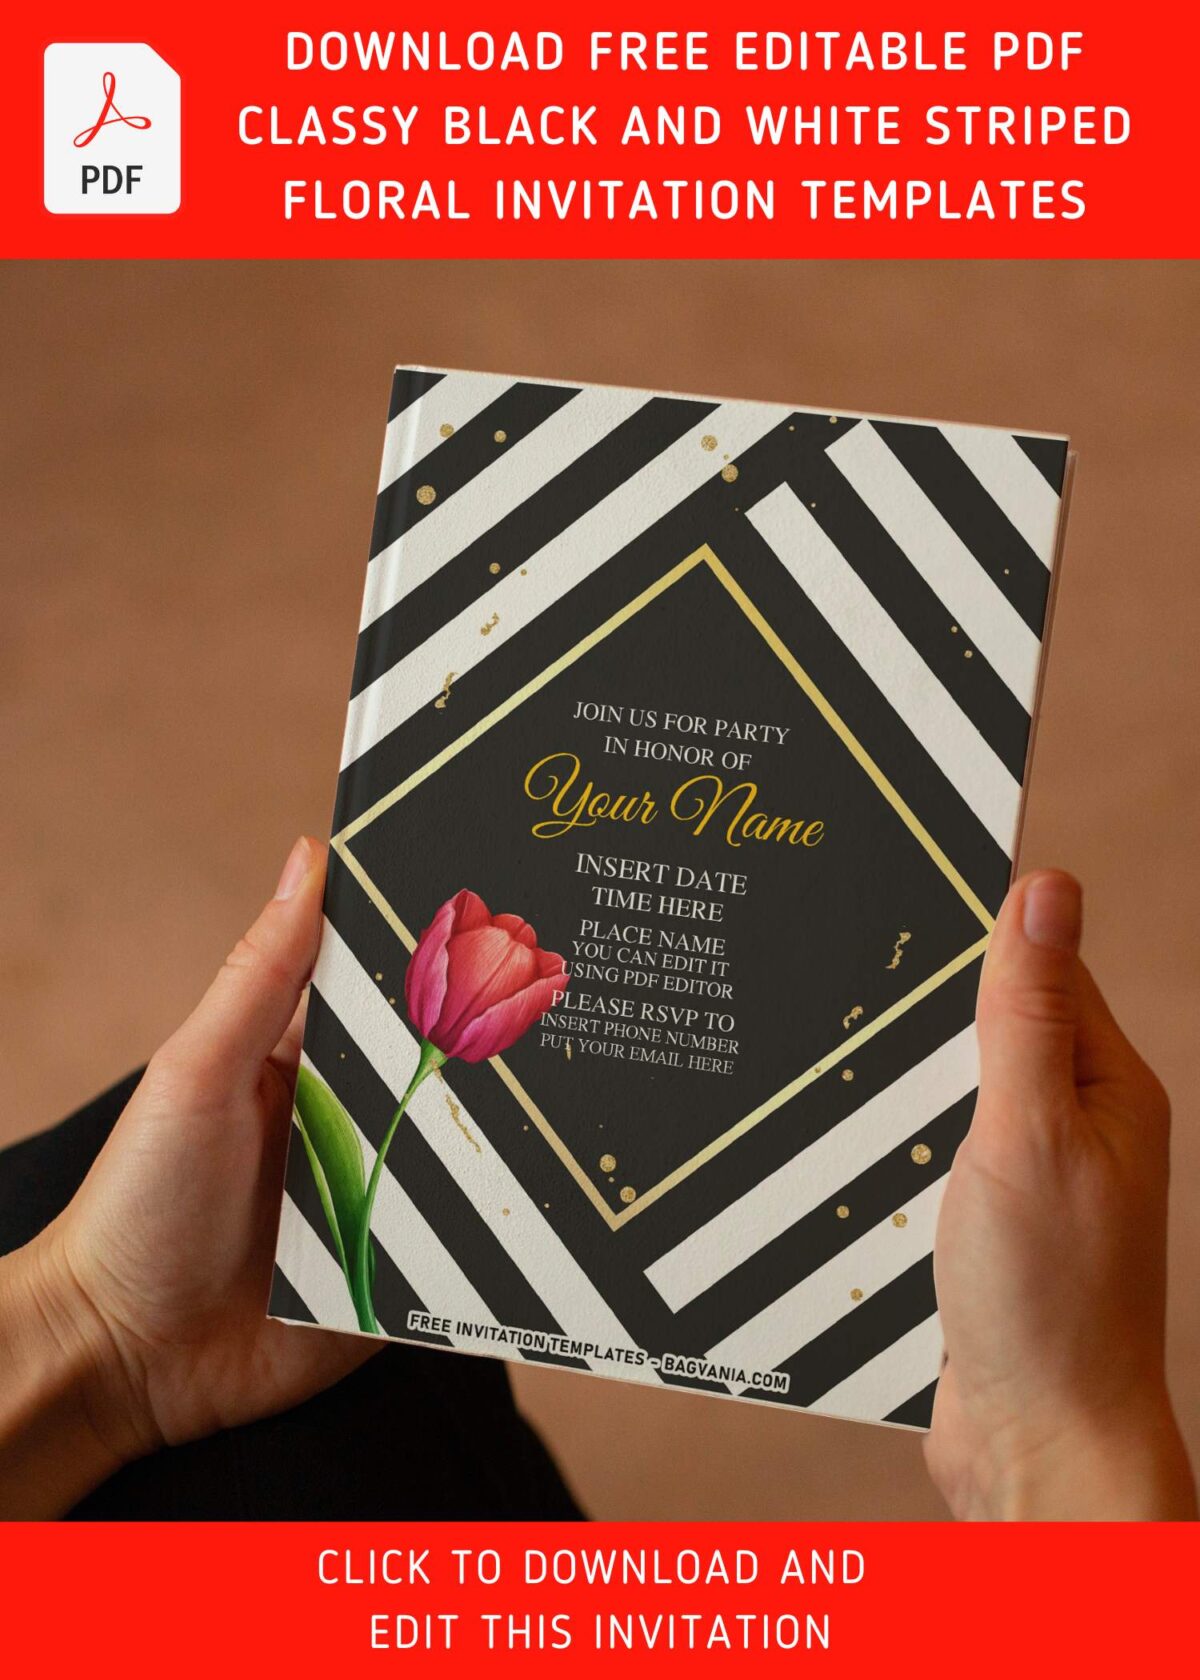 (Free Editable PDF) Classic Palette Black And White Floral Invitation Templates with enchanting gold rhombus shaped frame